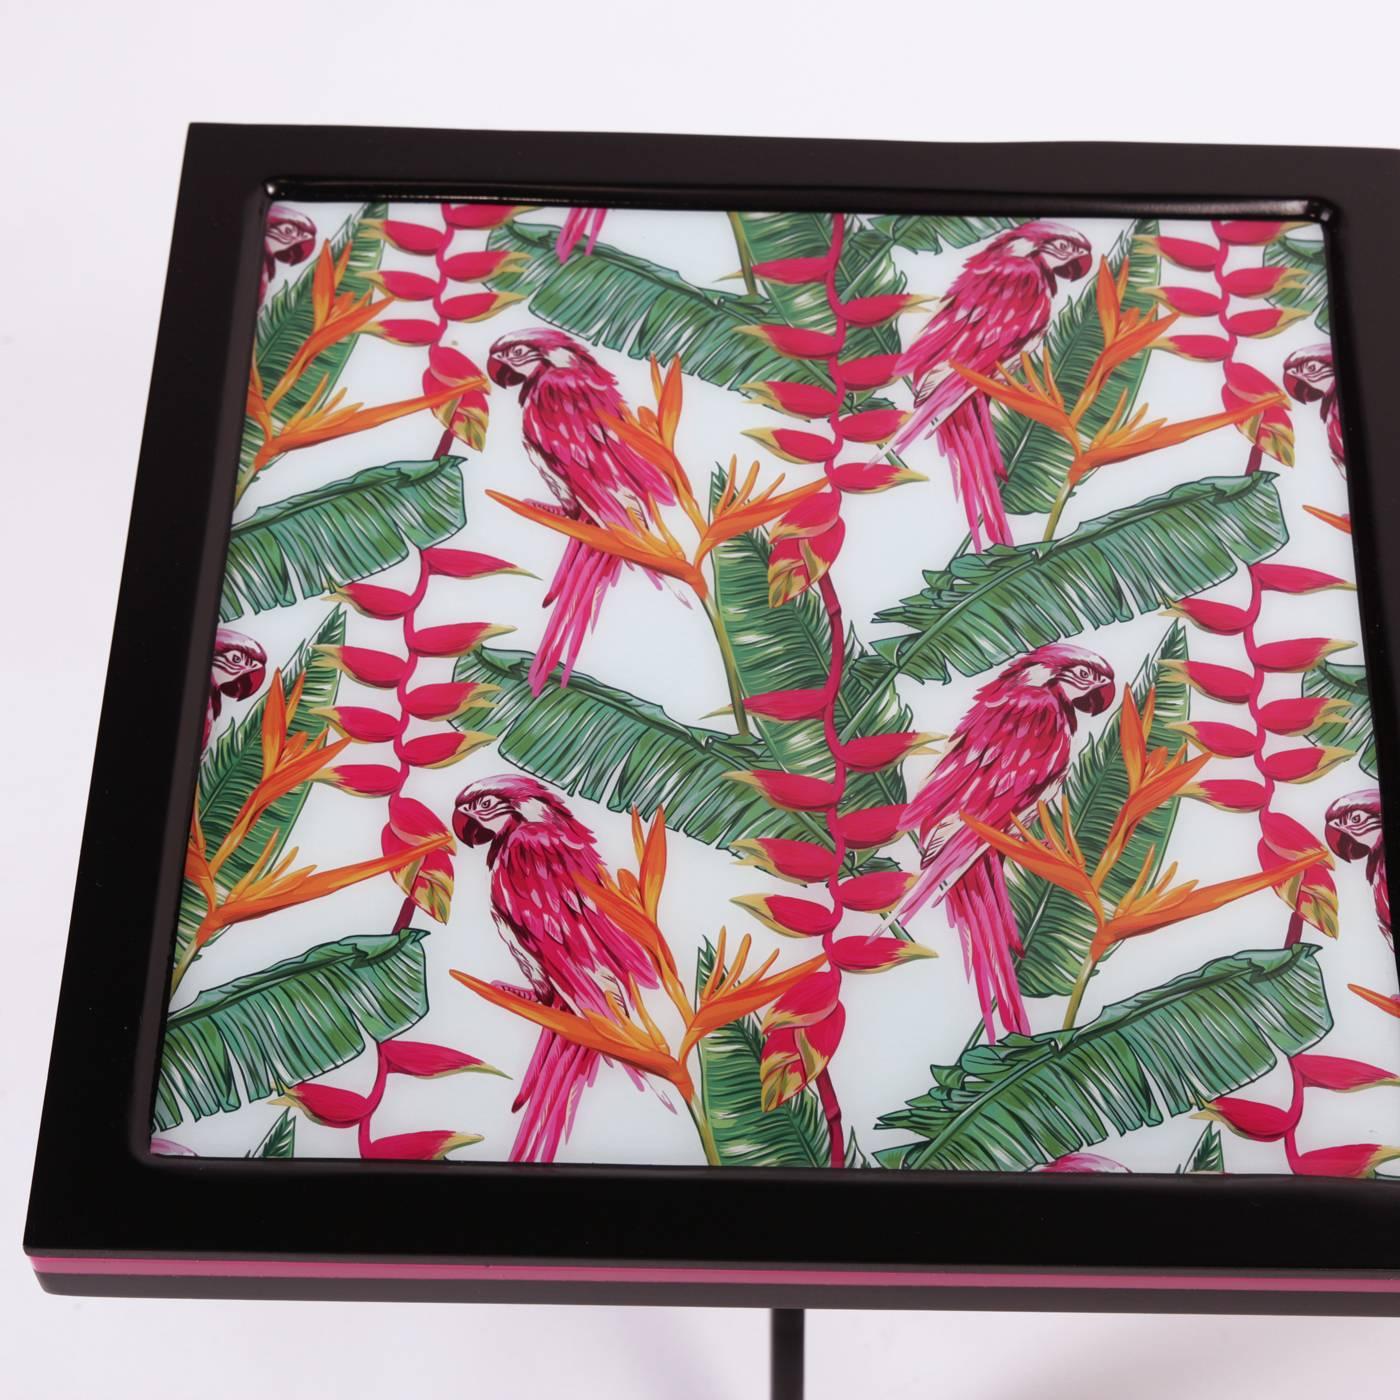 This striking side table will add a touch of color to any room, thanks to the exquisite cover of its top depicting a series of green palms and bright red parrots. A red accent outlines the squared edges of the top that is supported by a three-legged